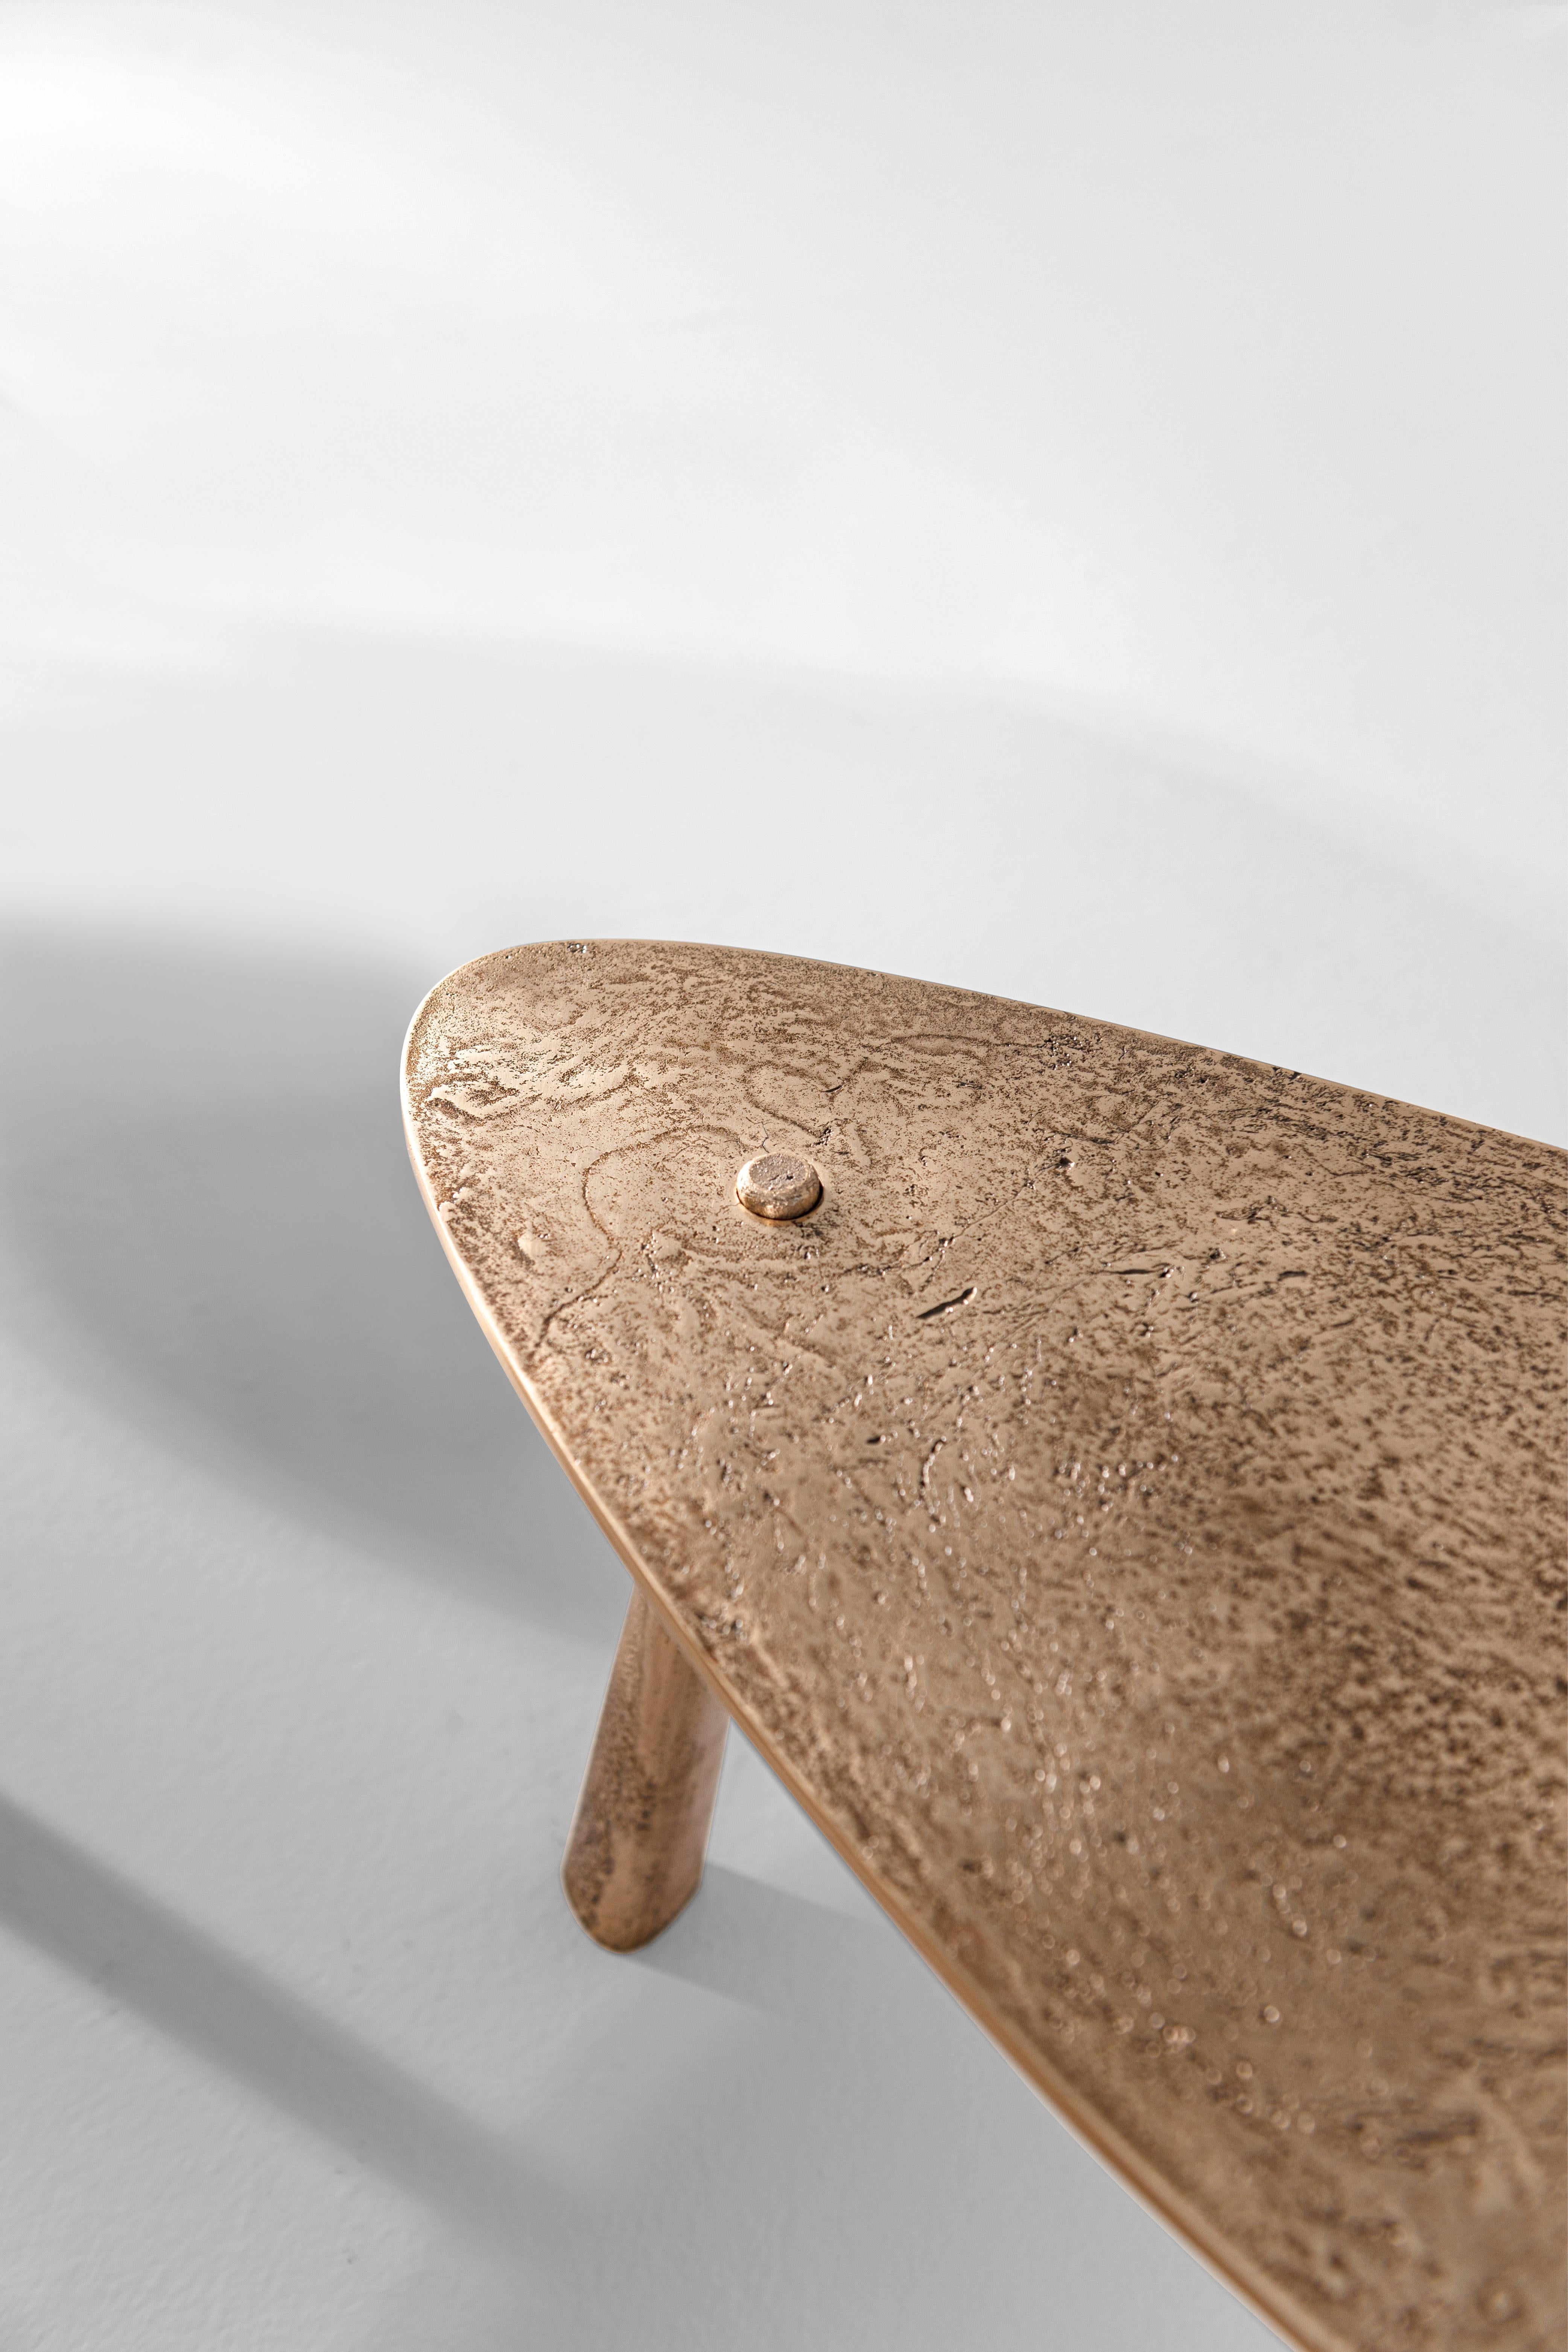 Drop coffee table is made through a bronze casting process, an ancient art dating back over 5.000 years. It takes the name from its minimal but sophisticated design: three apparently conical-shaped legs cross a drop-shaped top. The textured and